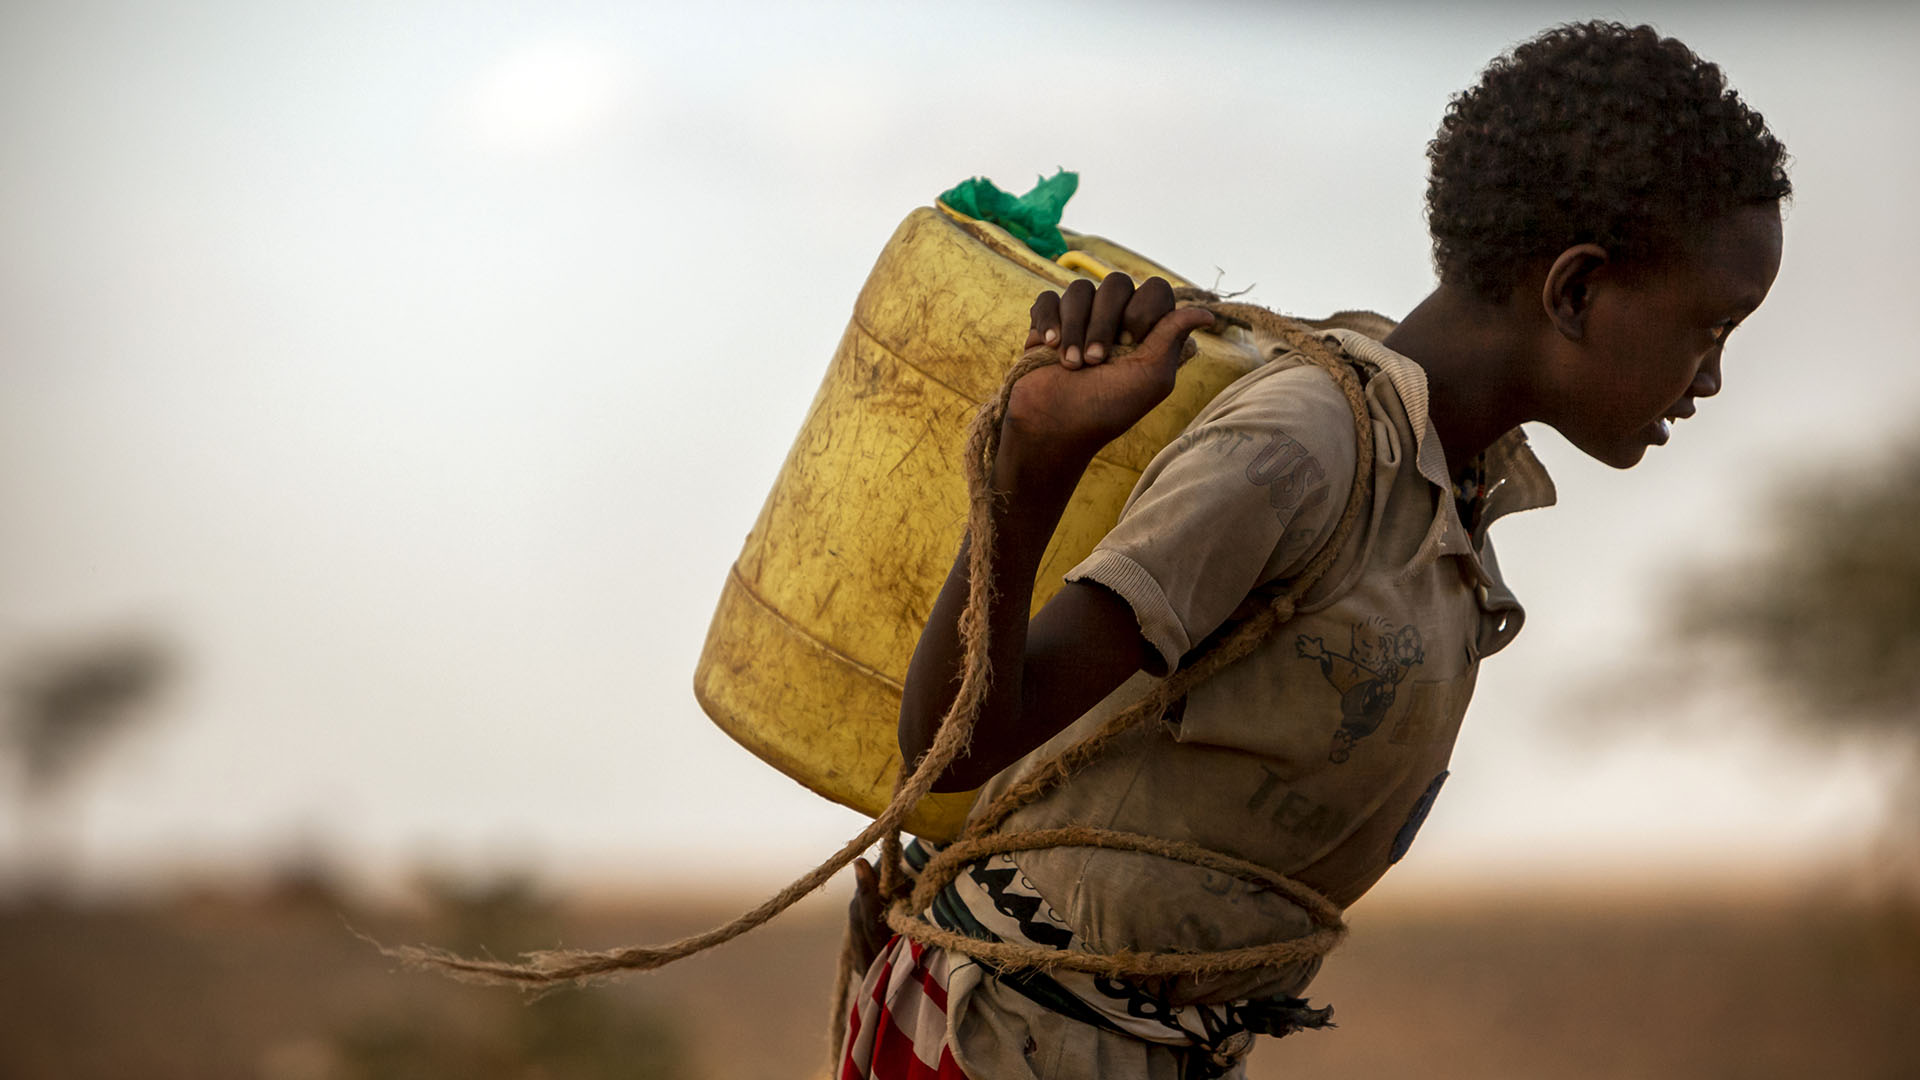 A Rendille child in Kargi, Kenya, carries water from a well recently renovated by Send Relief.